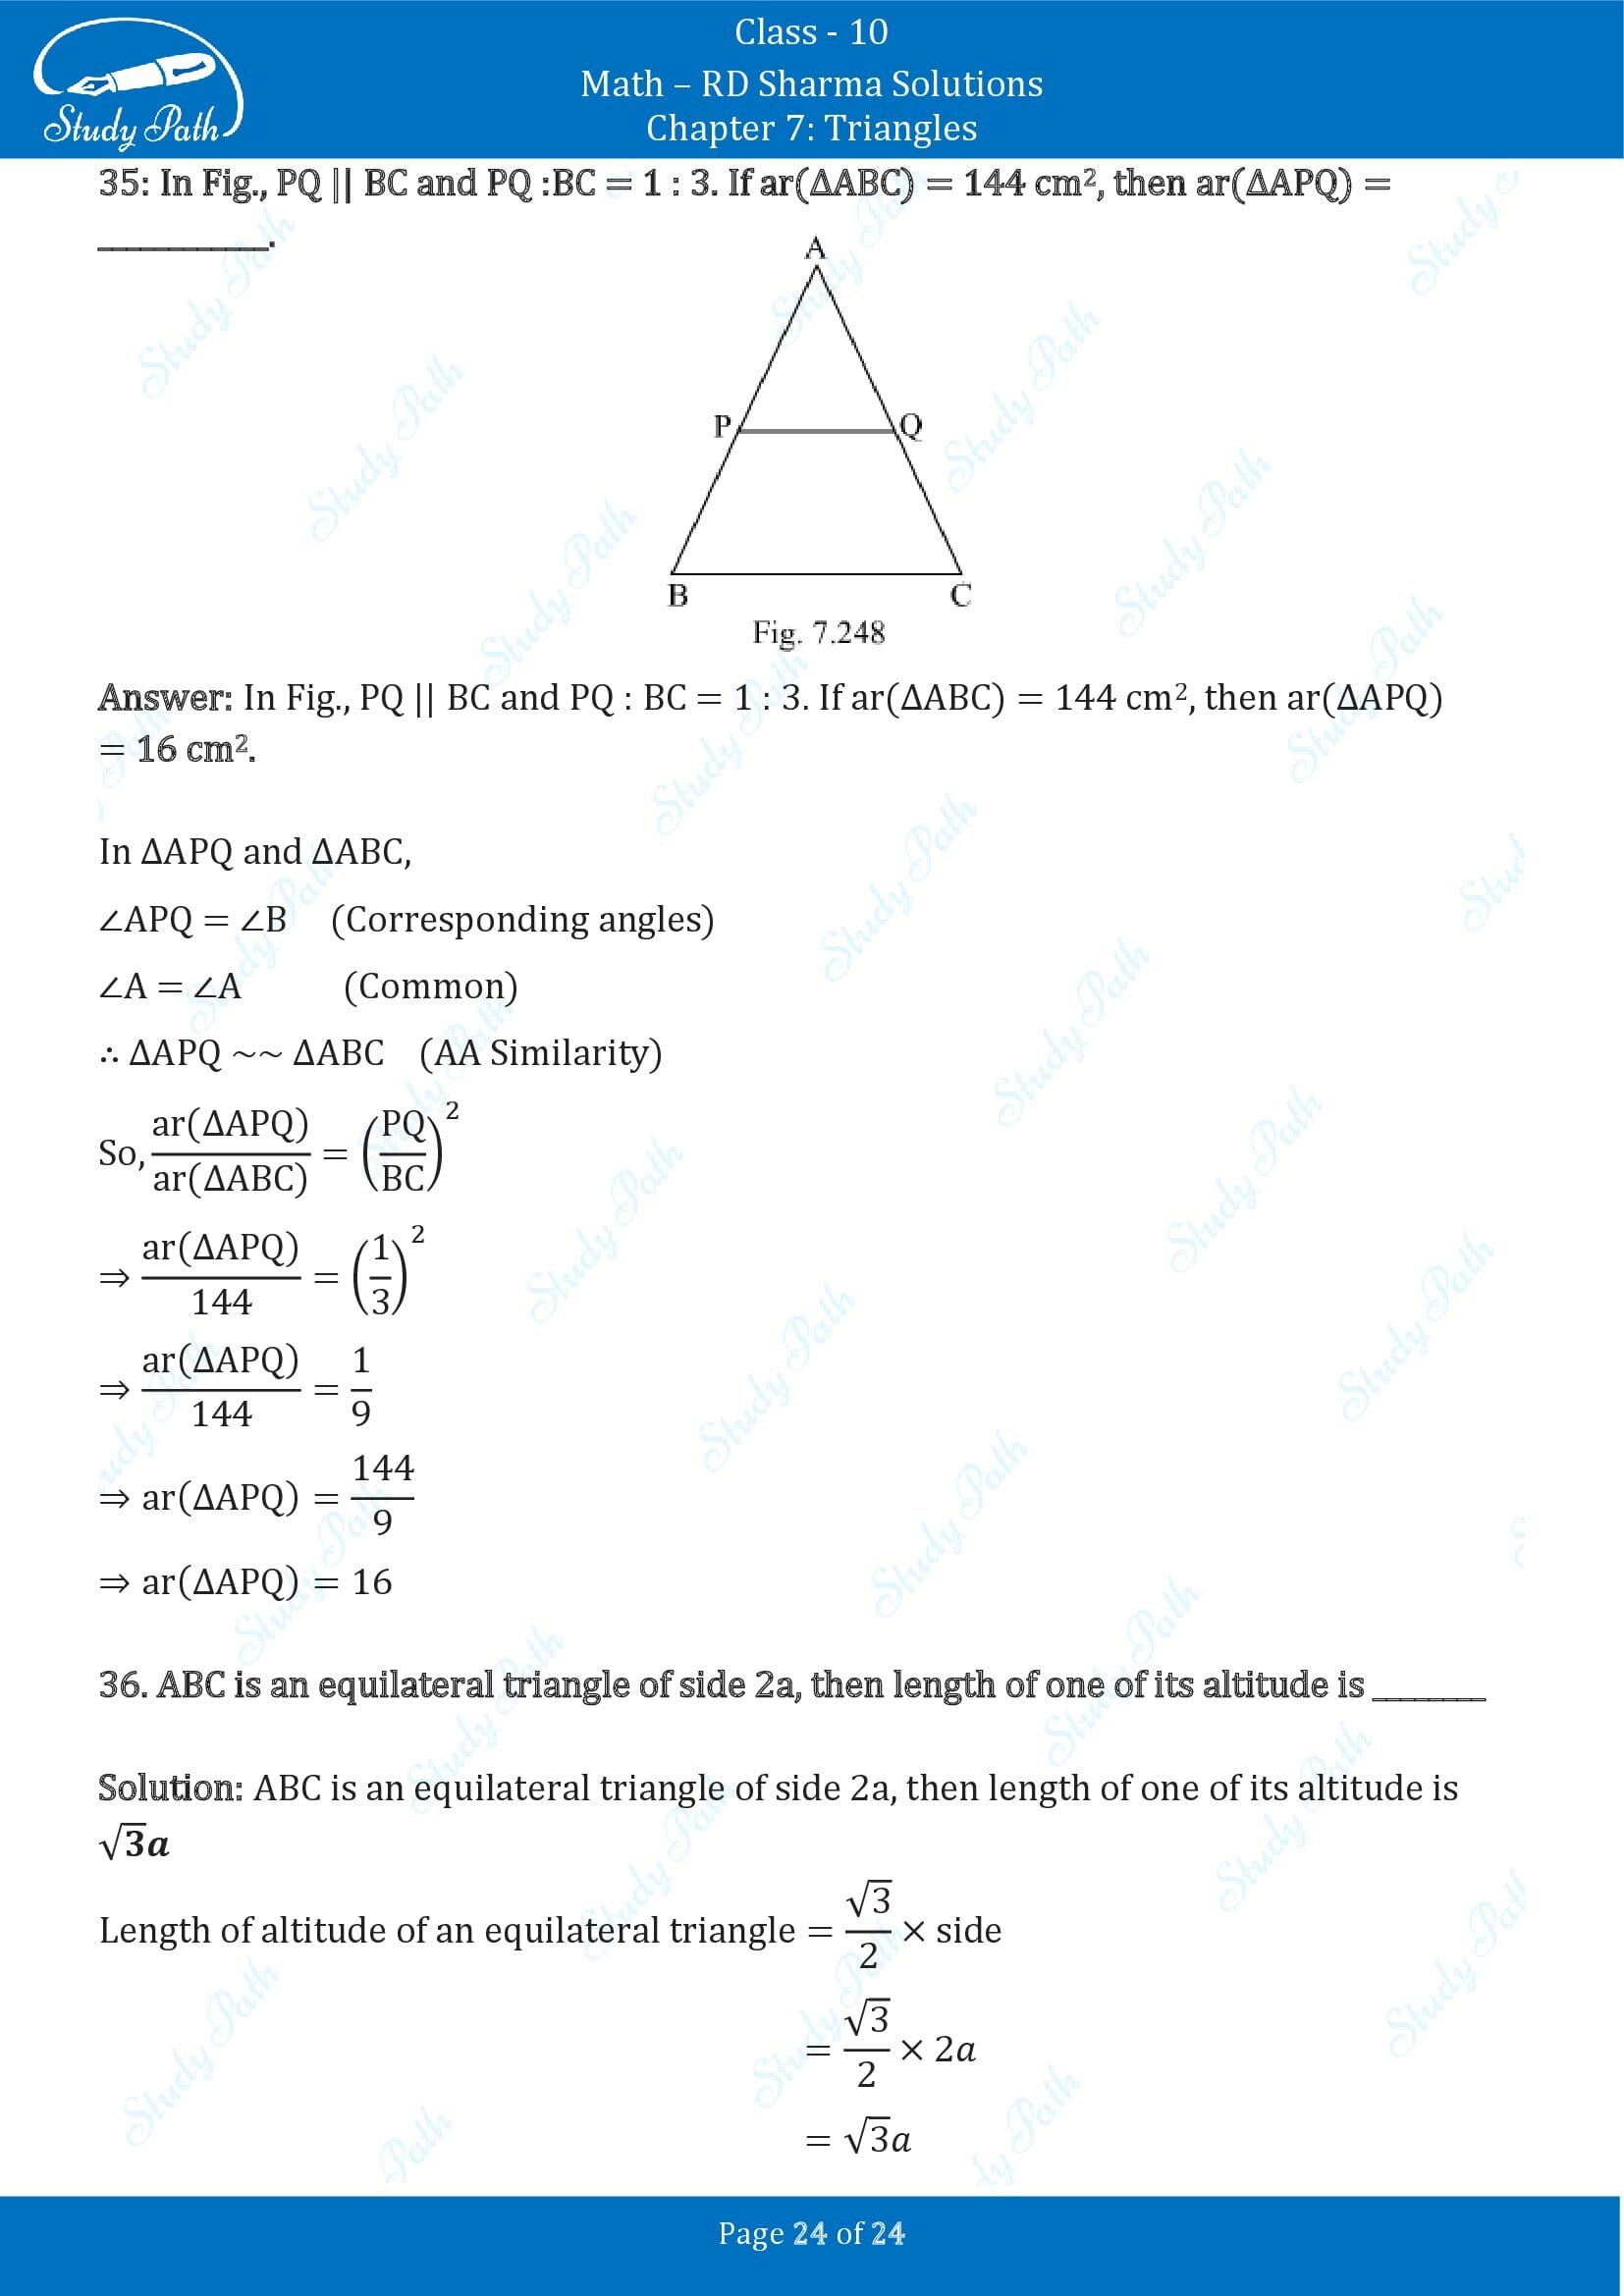 RD Sharma Solutions Class 10 Chapter 7 Triangles Fill in the Blank Type Questions FBQs 00024